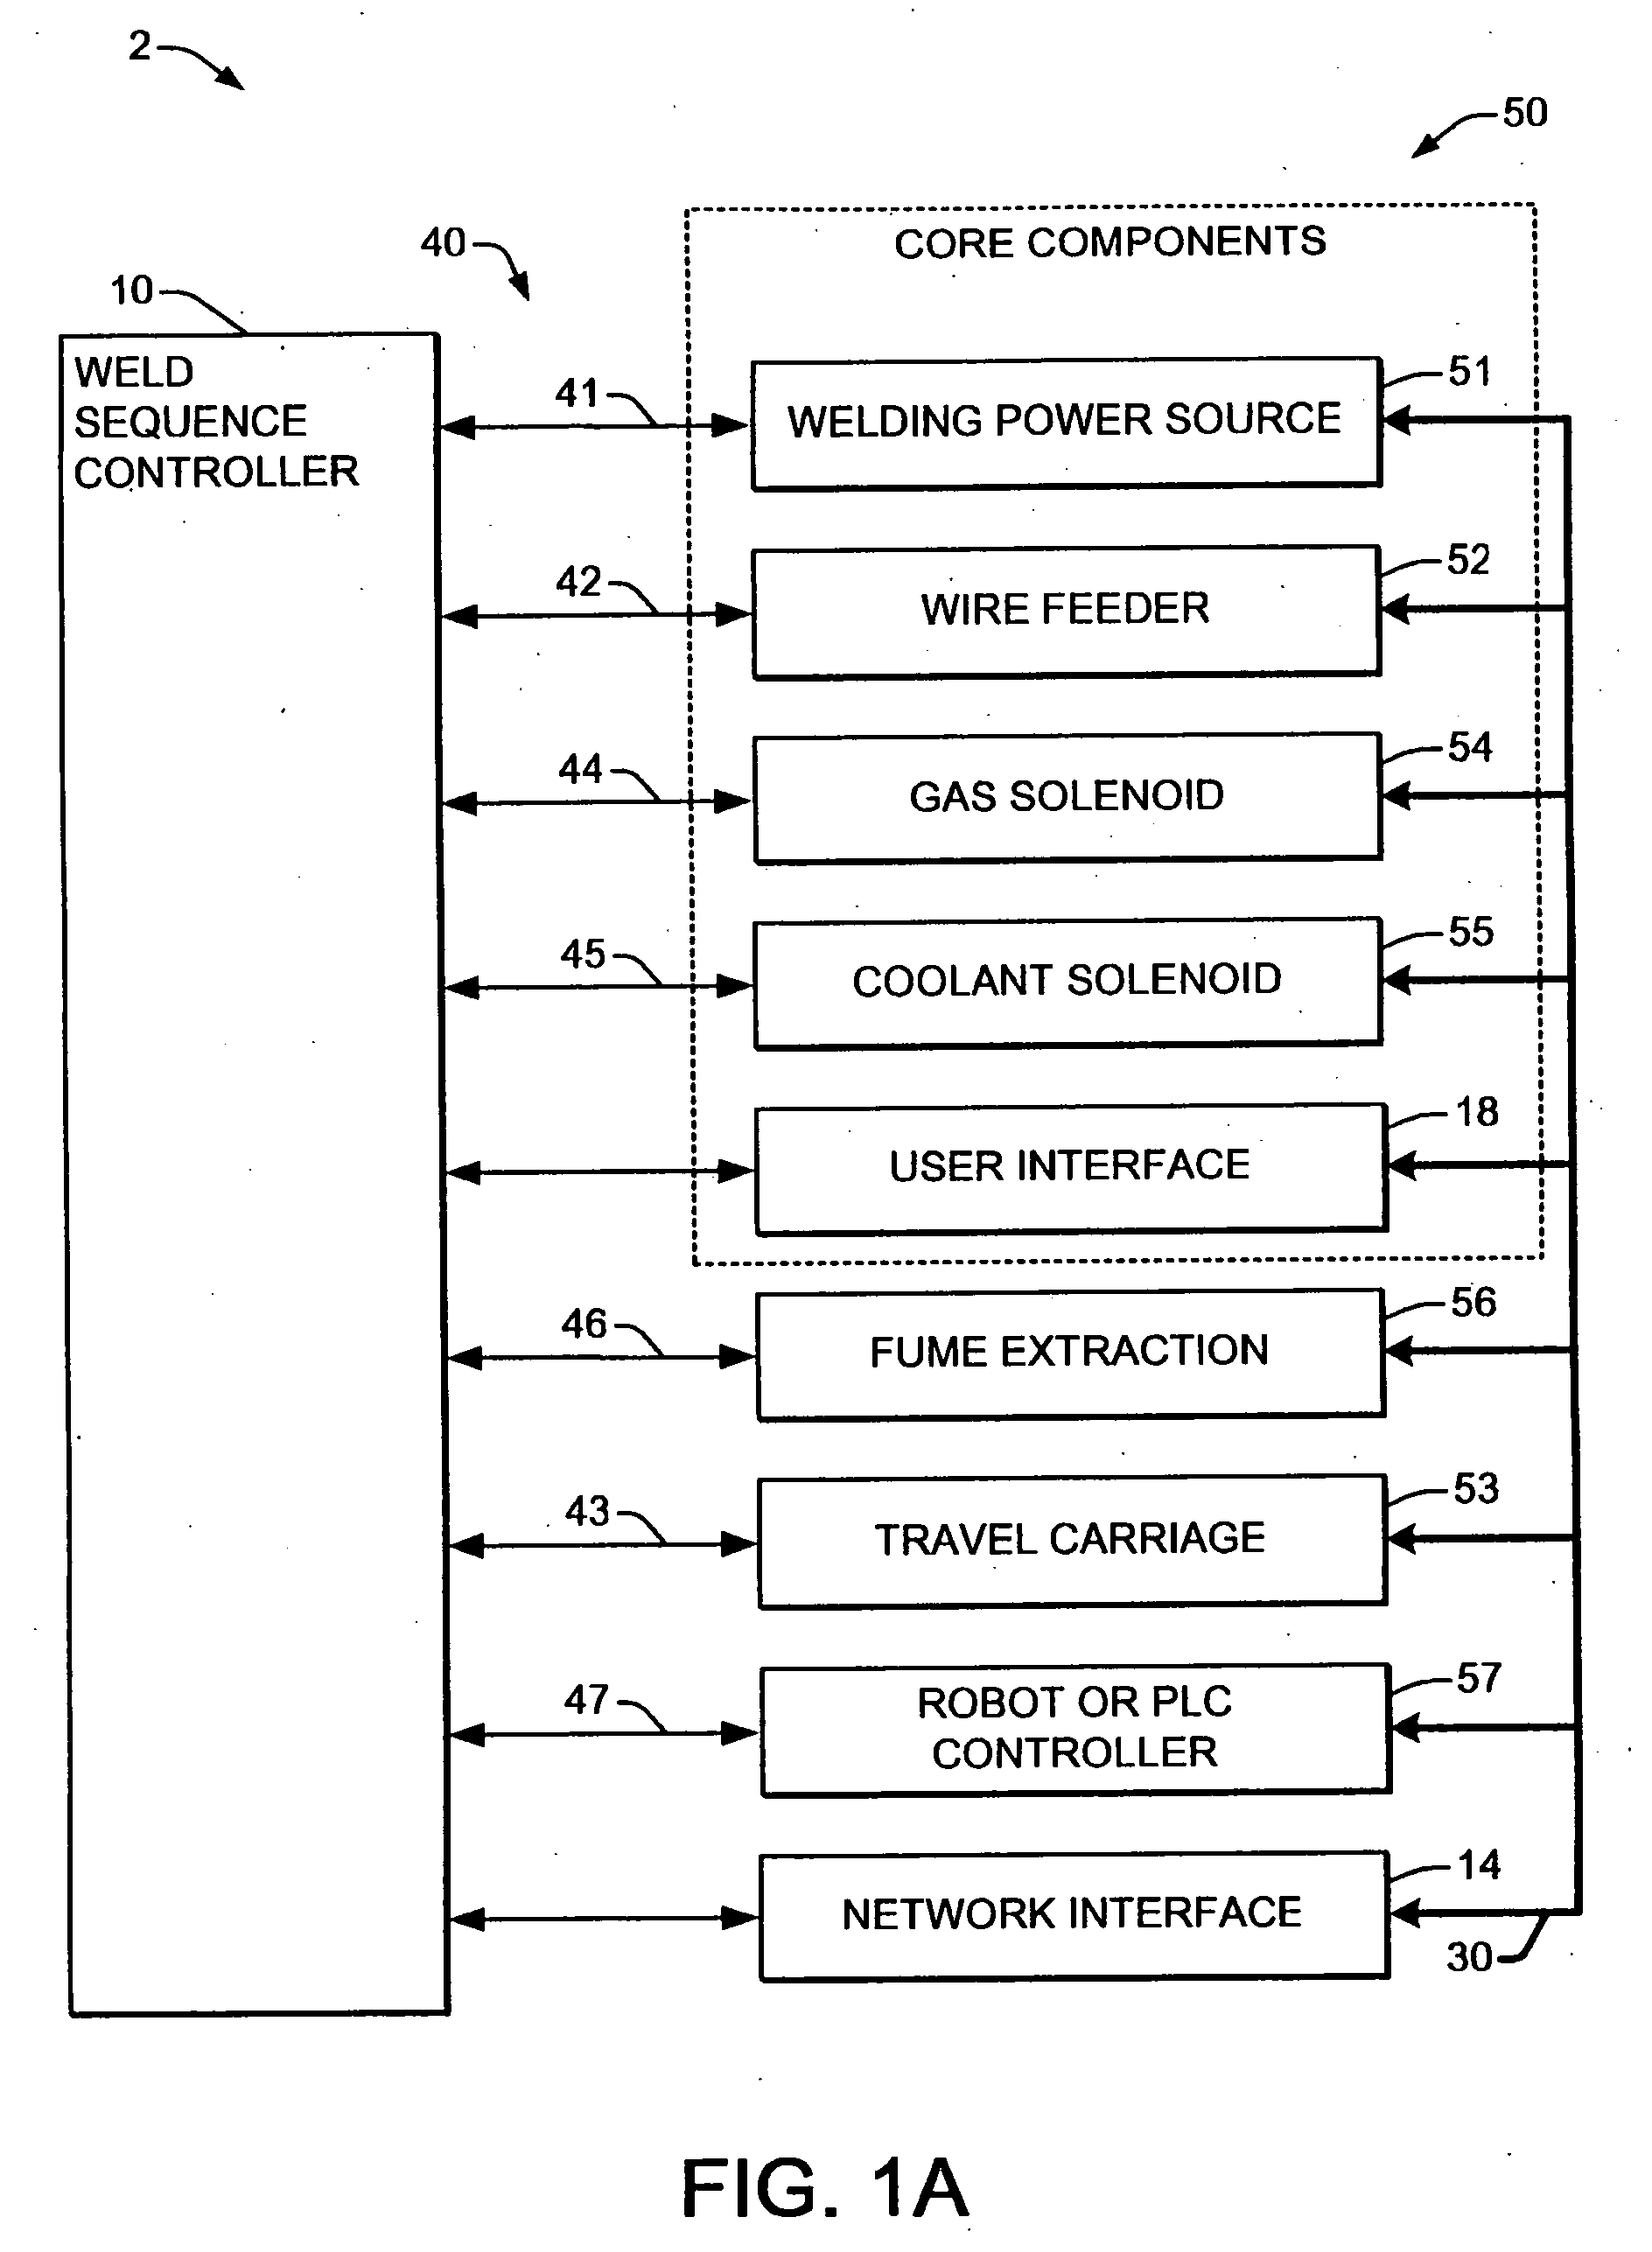 Welding system sequence control apparatus